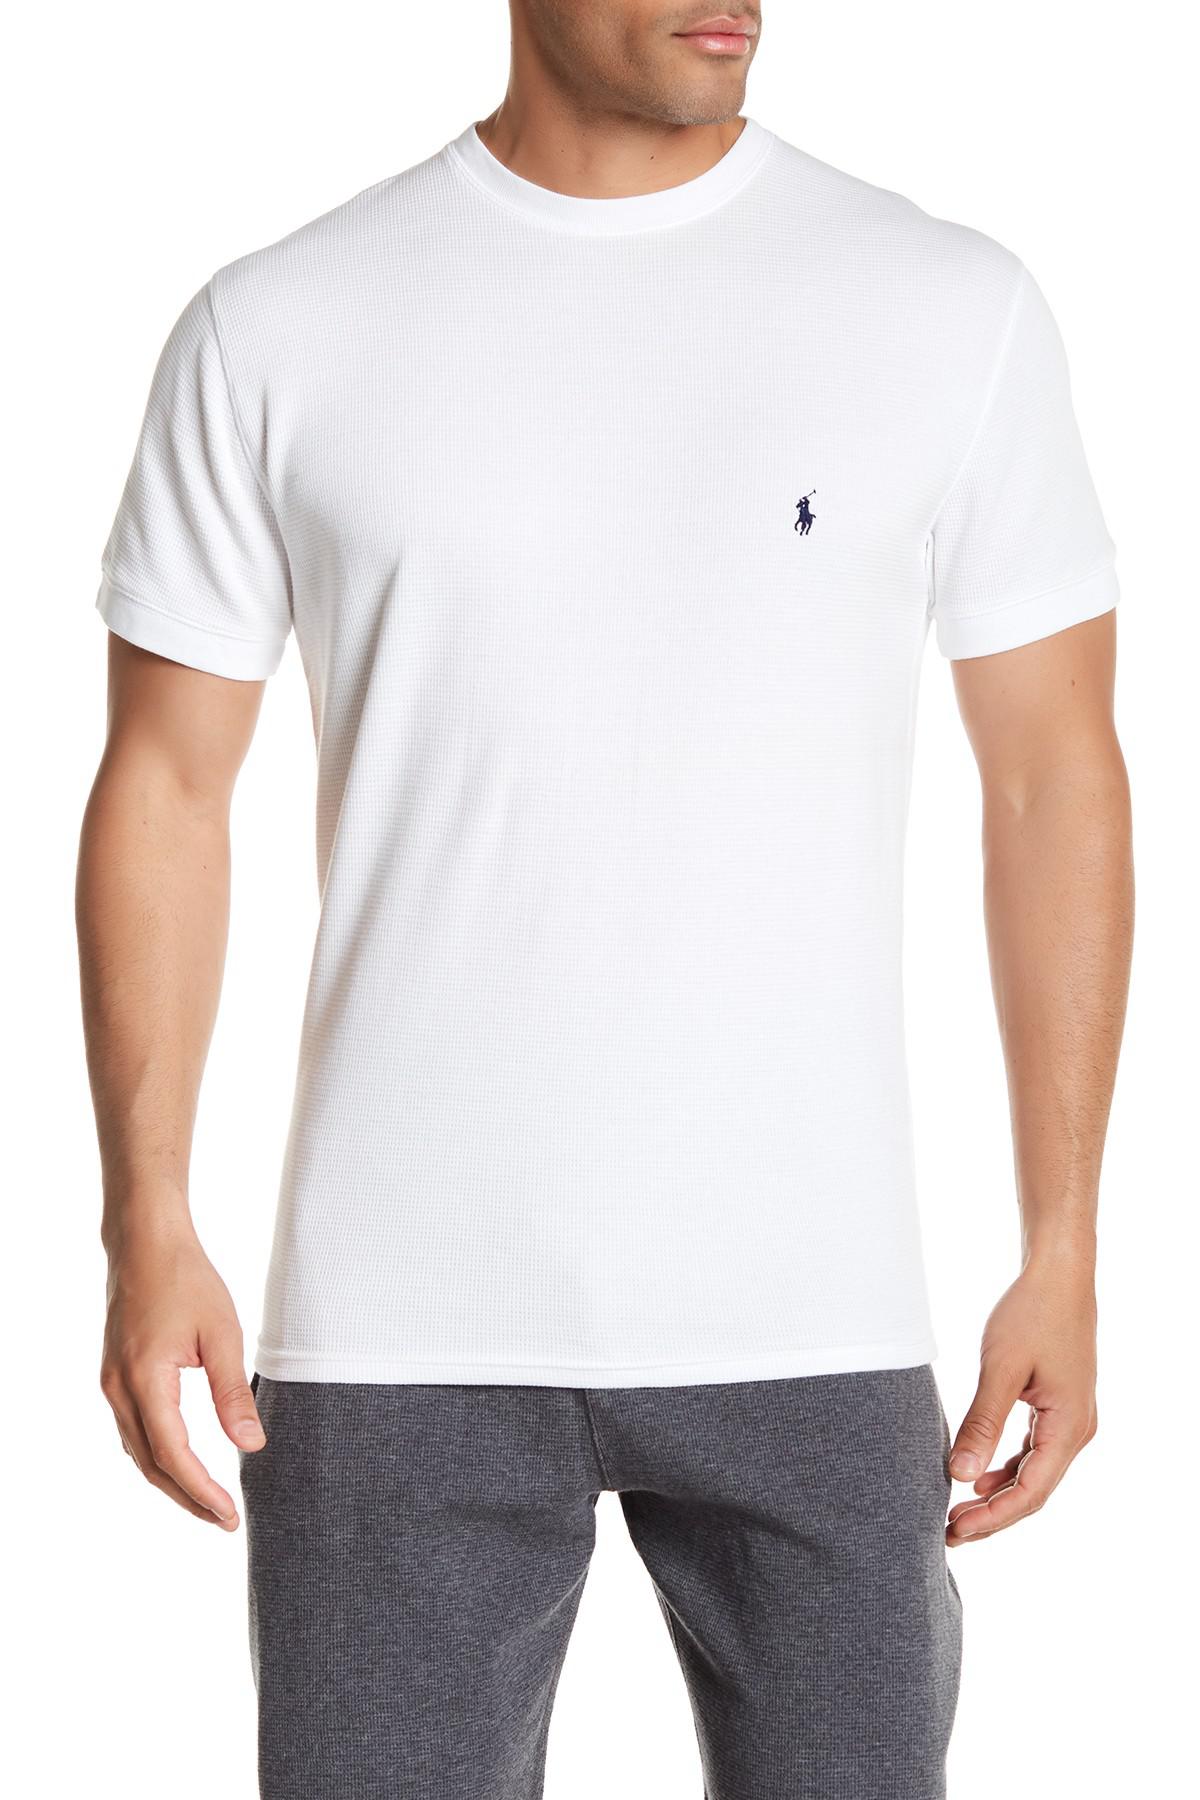 Polo Ralph Lauren Cotton Waffle Knit Short Sleeve Tee in White for 